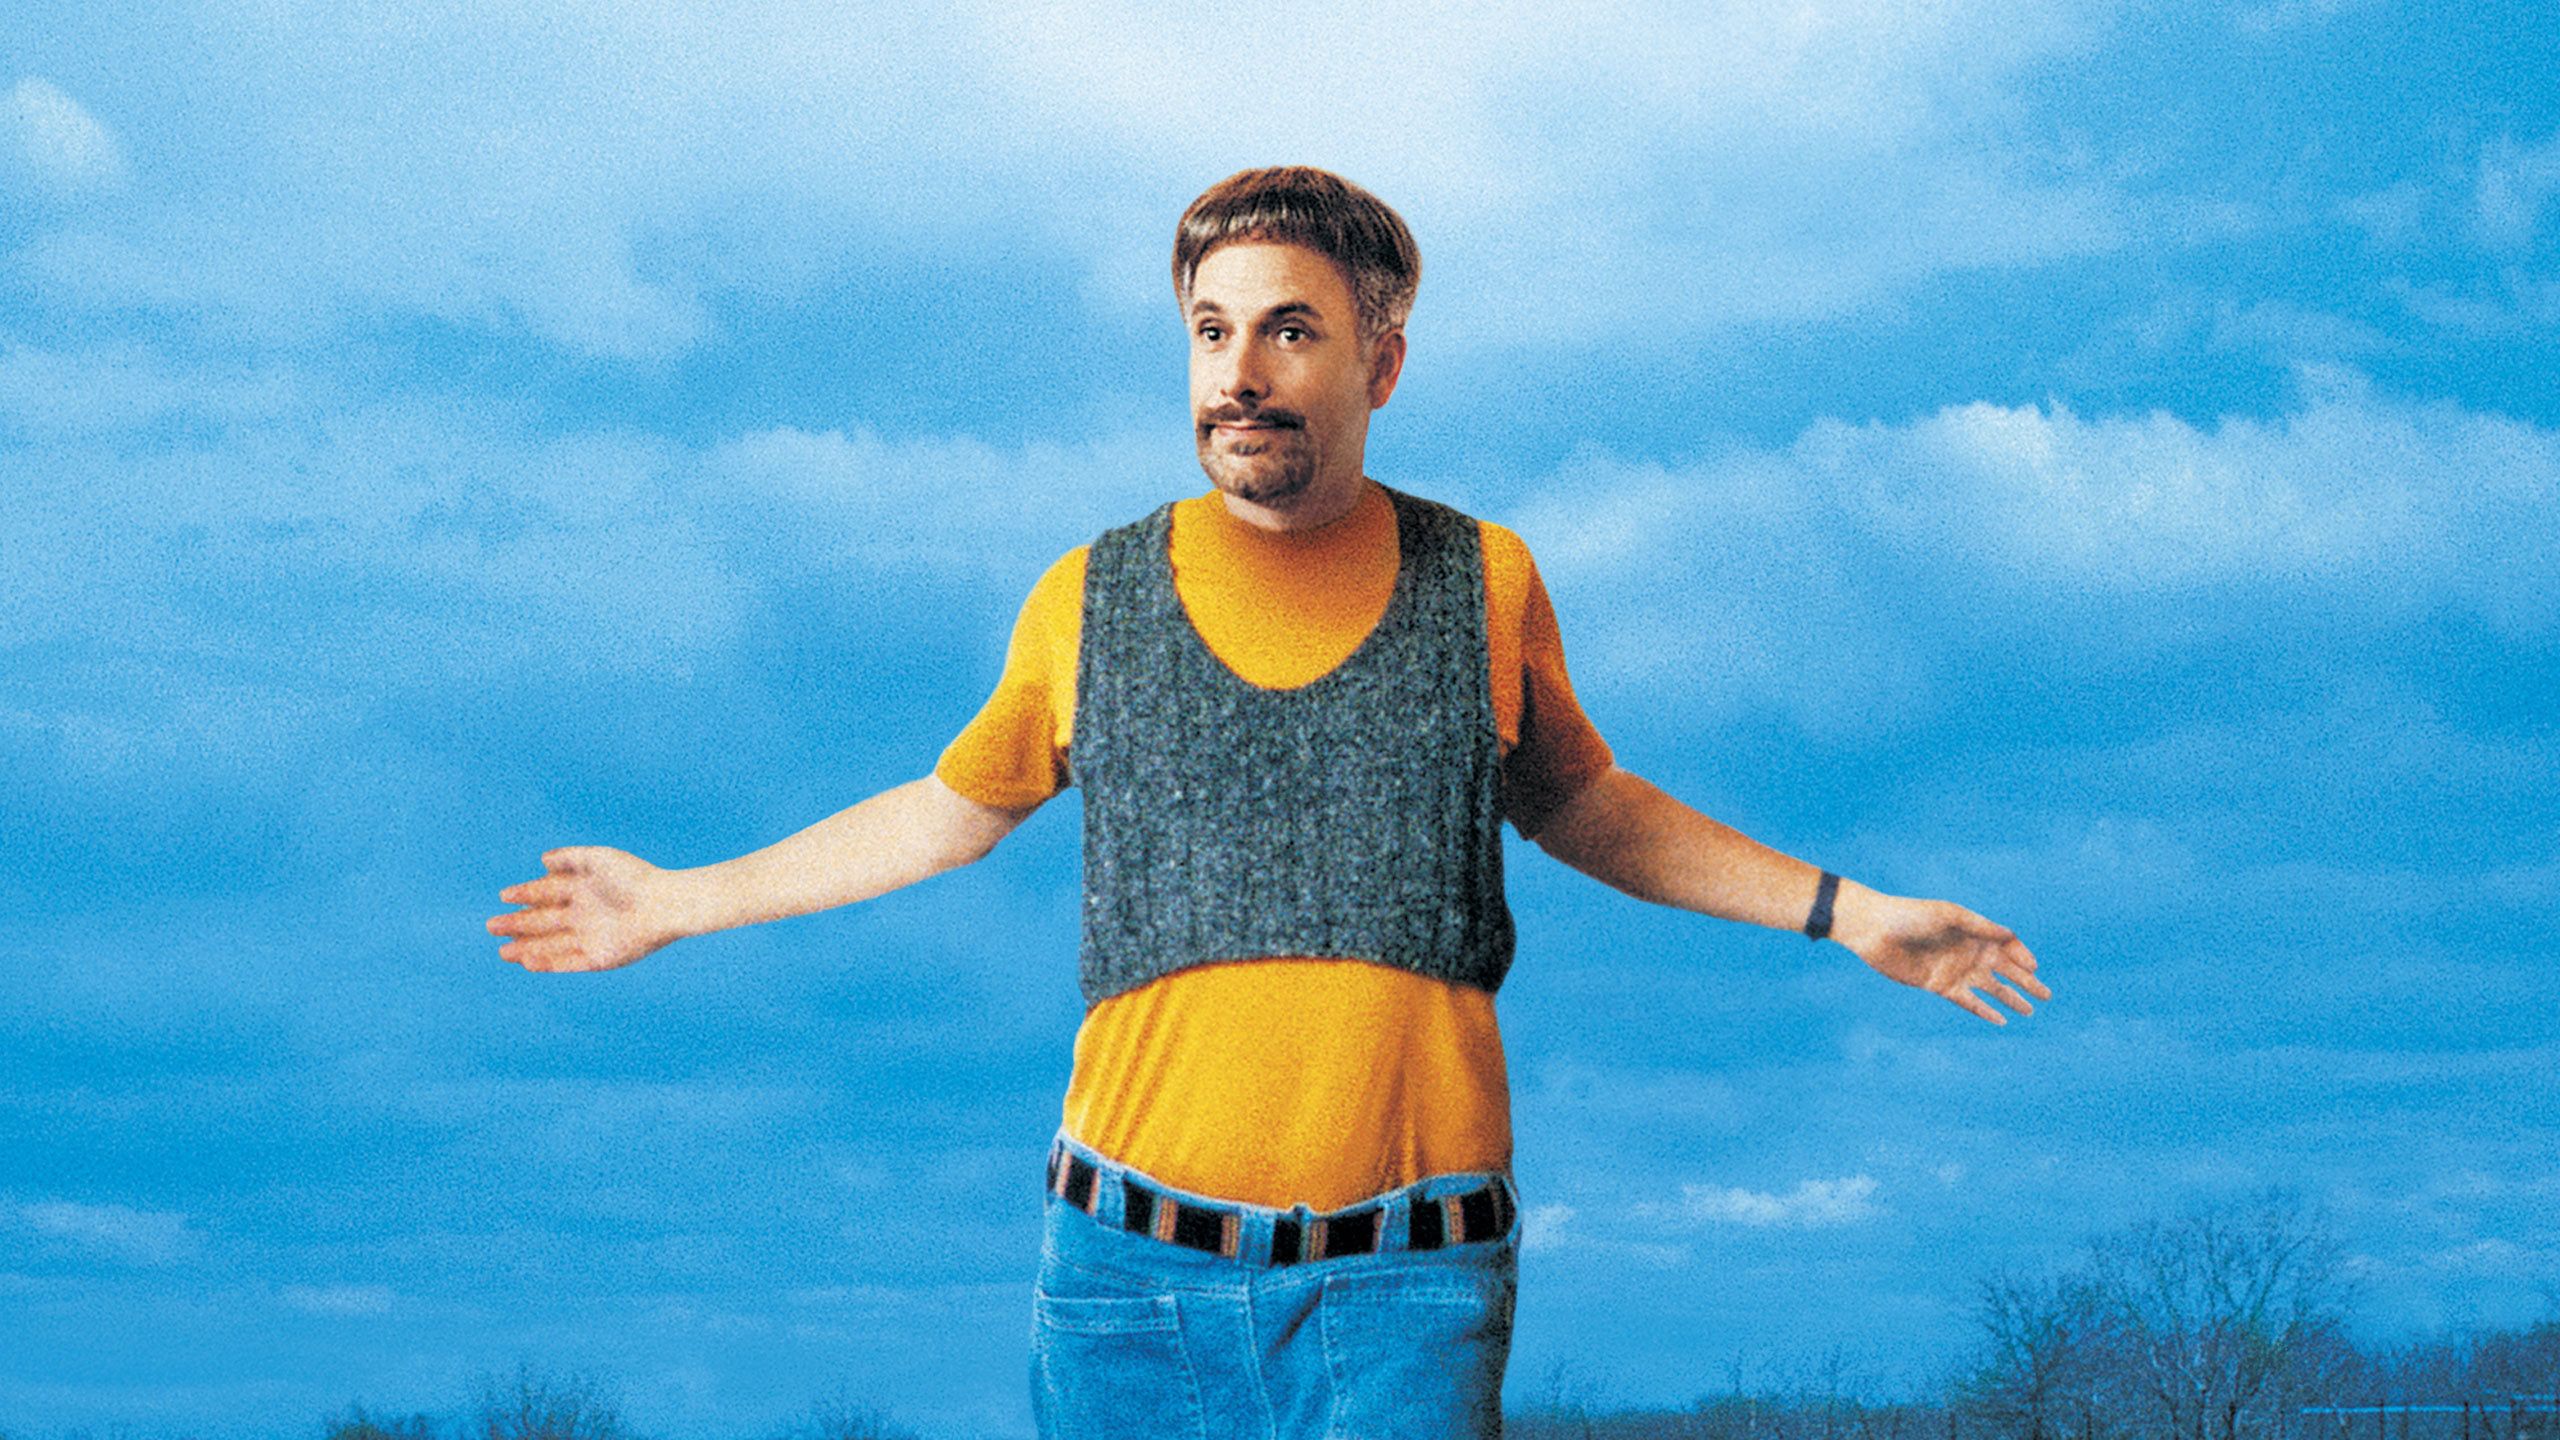 Waiting for an available server retrying. Waiting for Guffman 1996. Waiting for. Guffman бренд фото. Гуфман дружил.